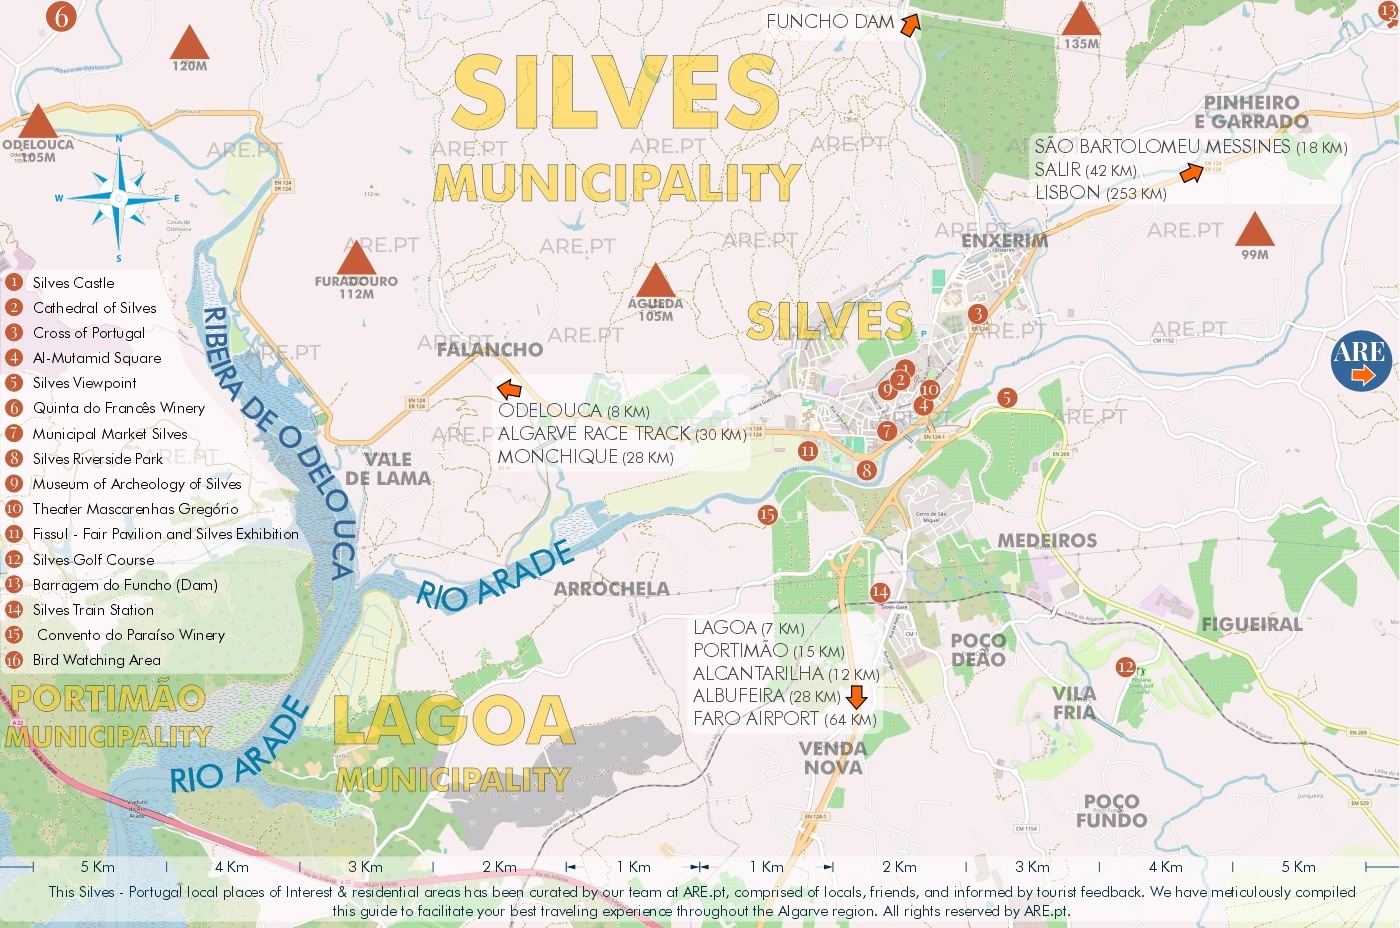 Map of Silves and surroundings, with main points of interest, useful locations and residential areas. Distances to the main locations in the south of Portugal